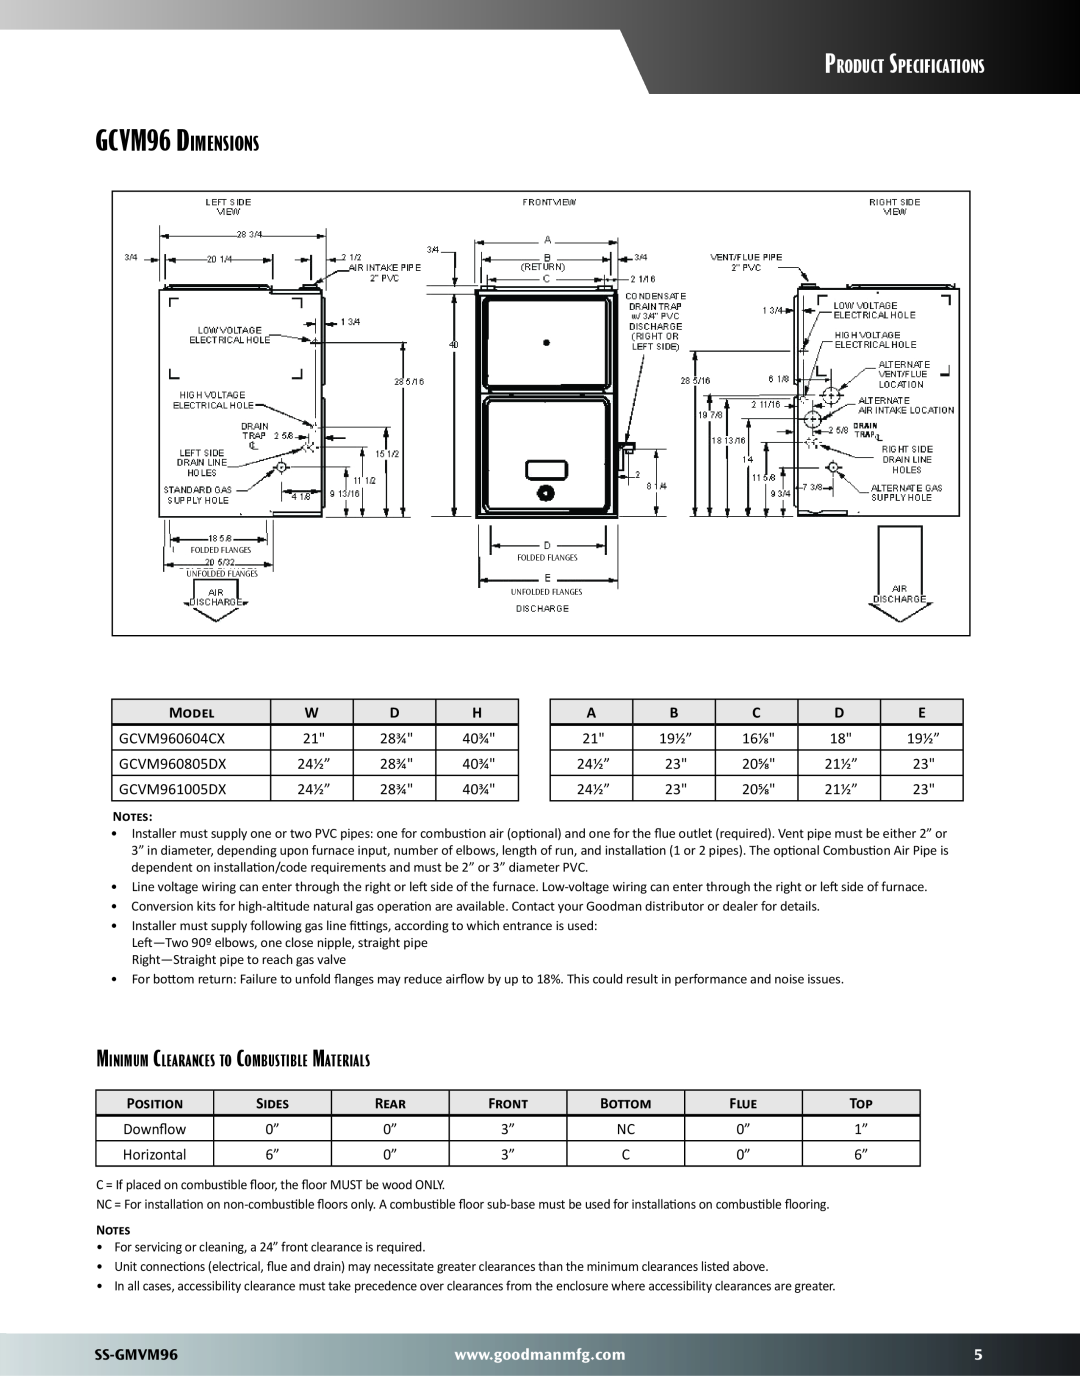 Goodman Mfg dimensions GCVM96 Dimensions, Product Specifications, Minimum Clearances to Combustible Materials, SS-GMVM96 